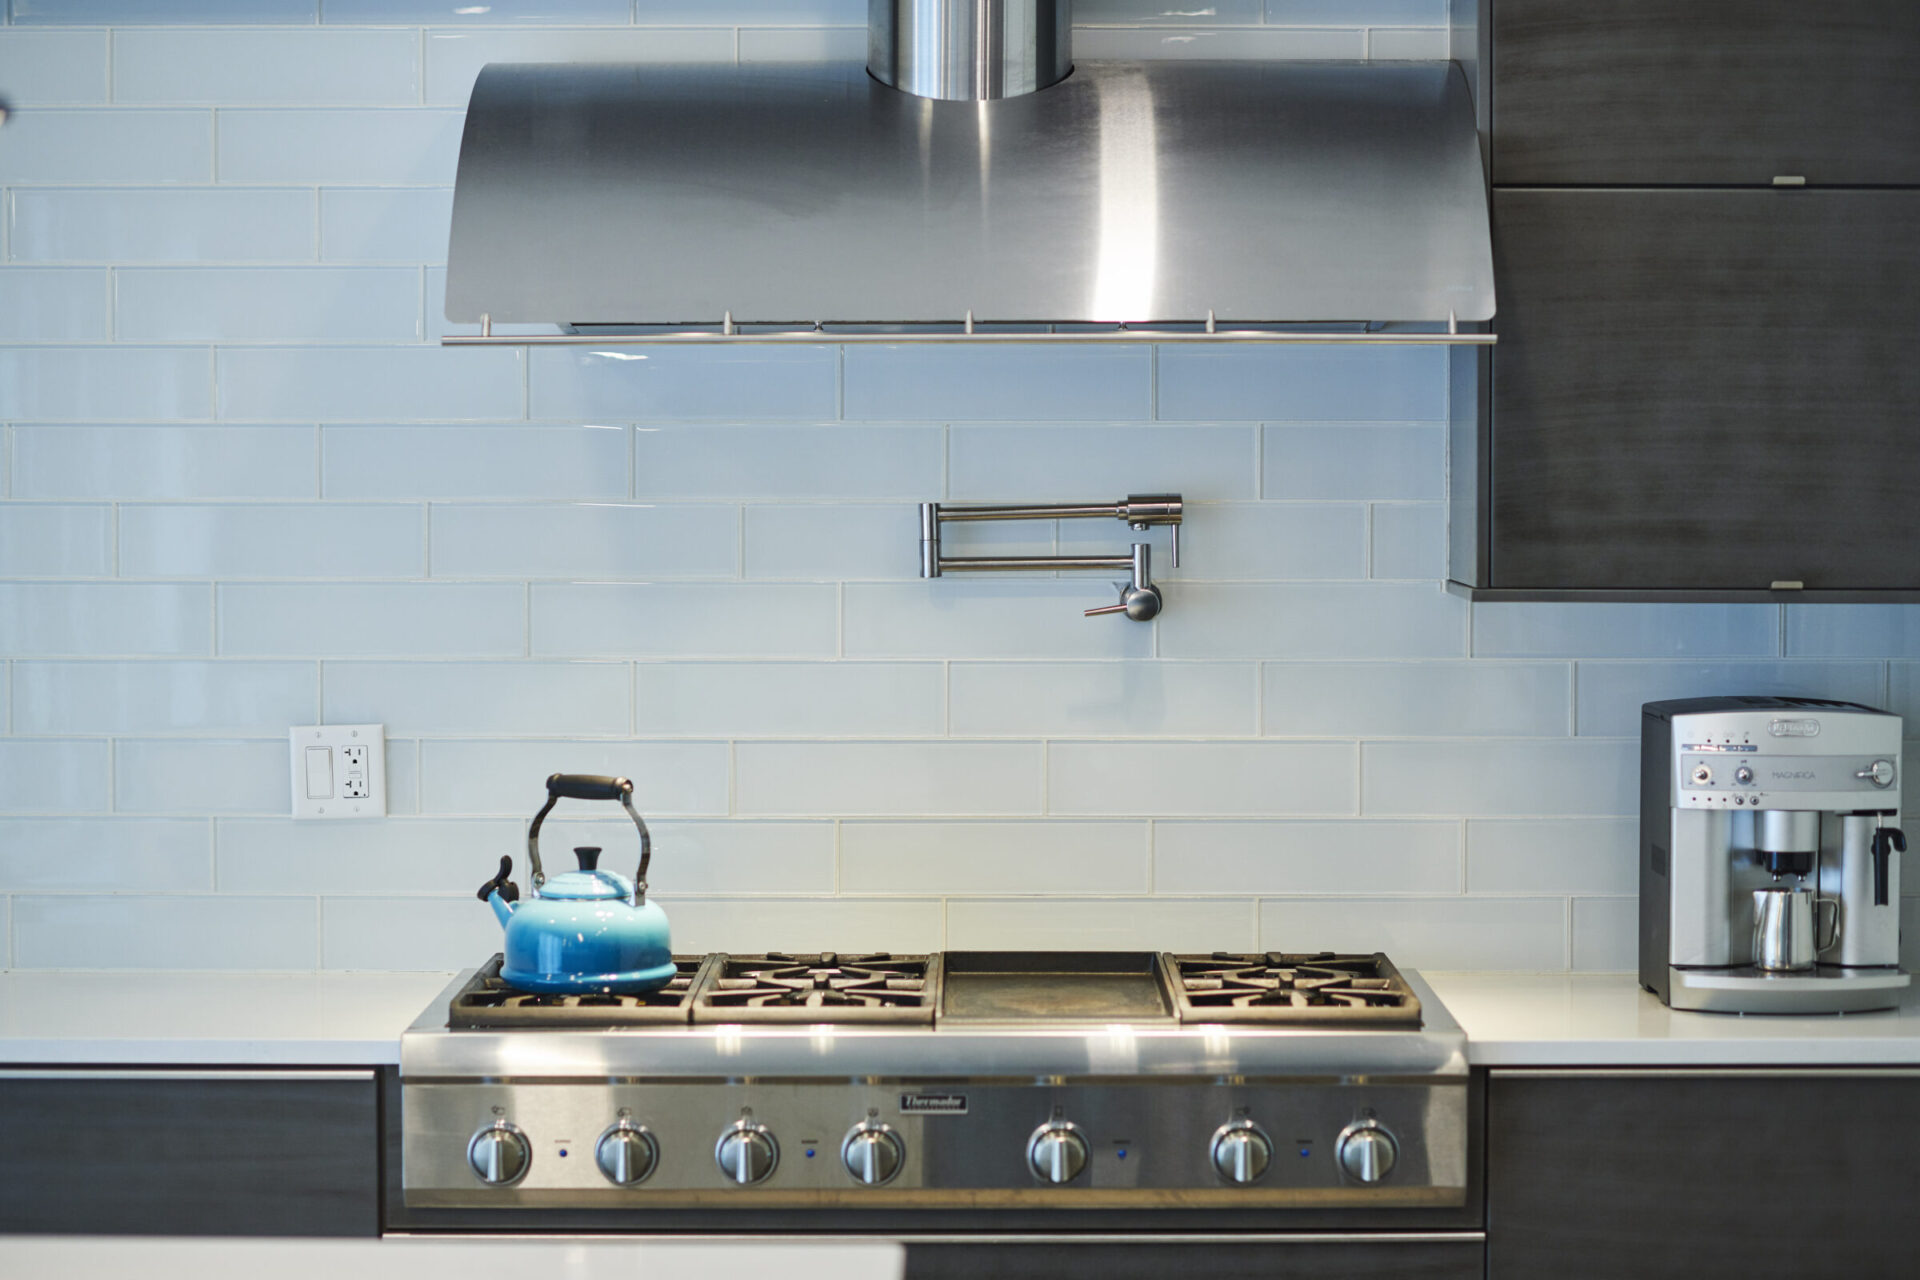 A modern kitchen with stainless steel appliances, a blue kettle on the stove, light blue backsplash tiles, and a sleek coffee machine.